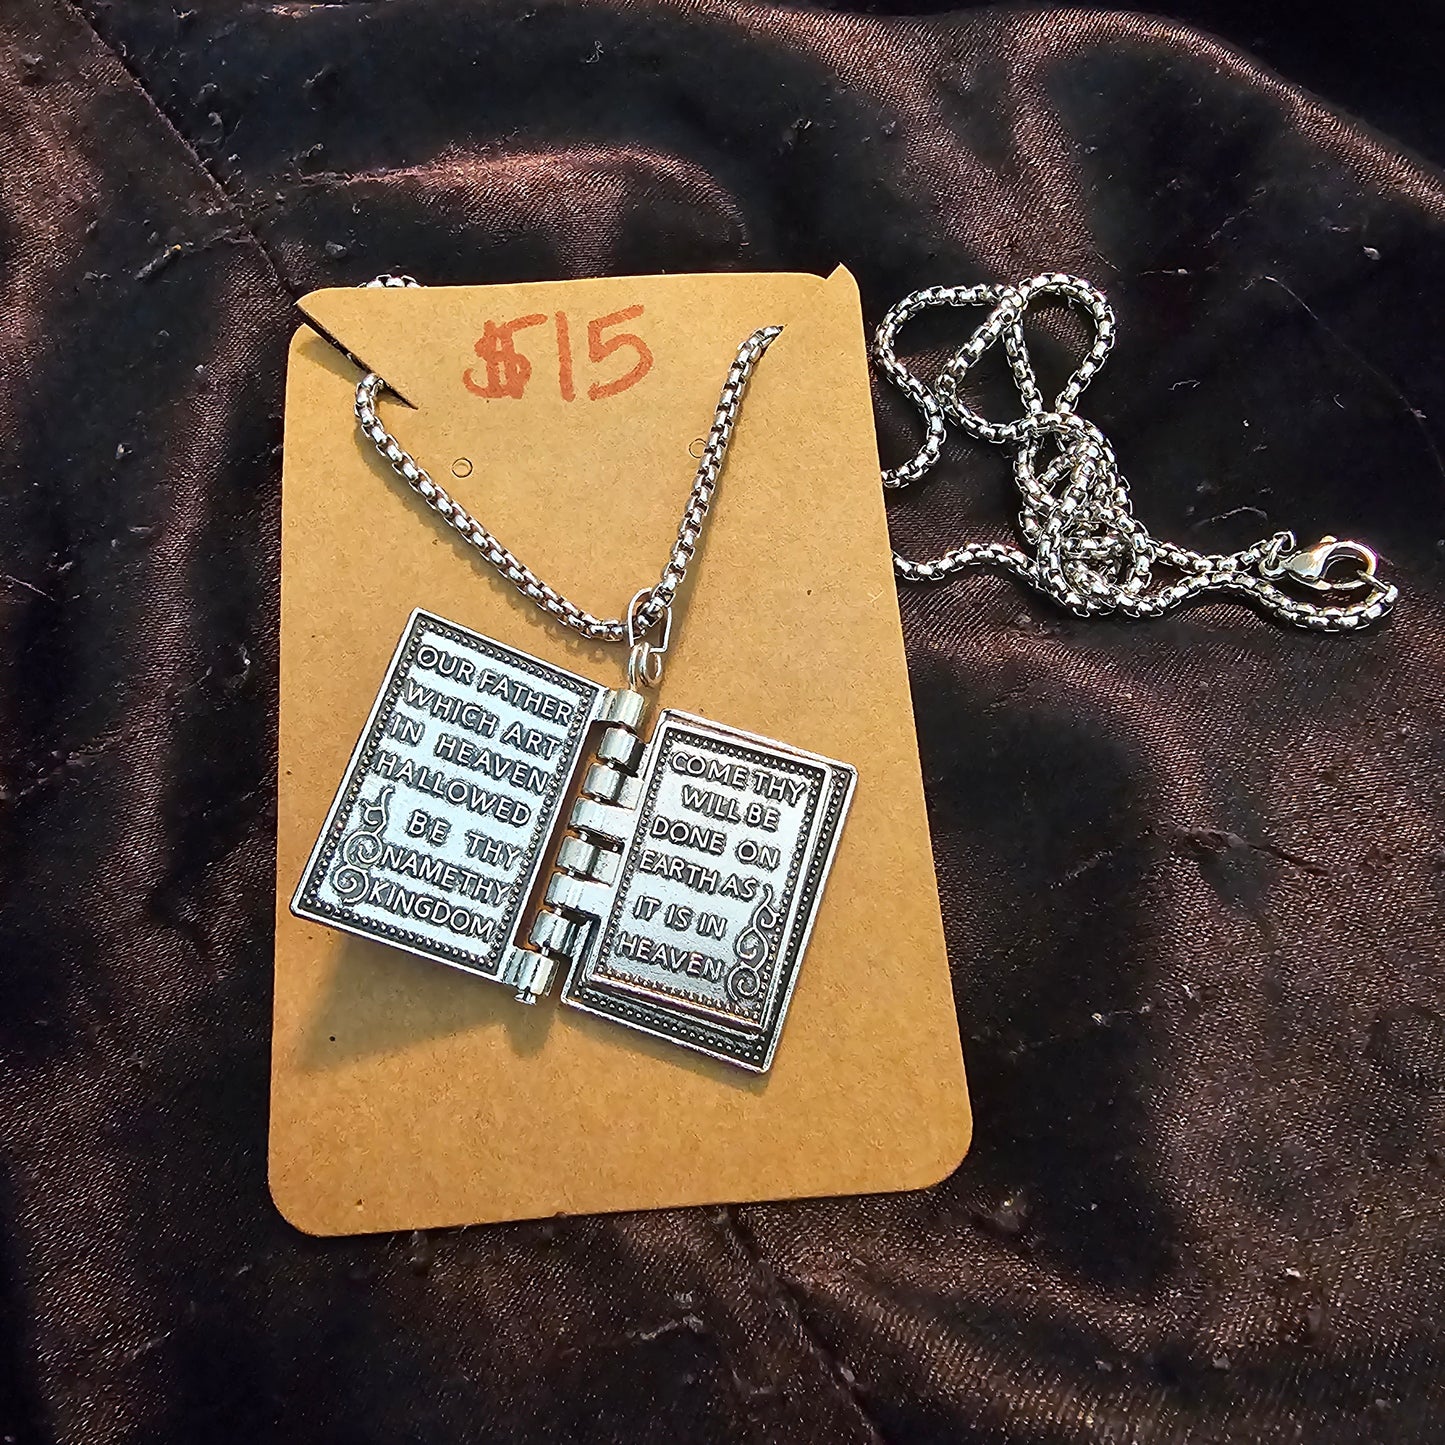 Bible necklace